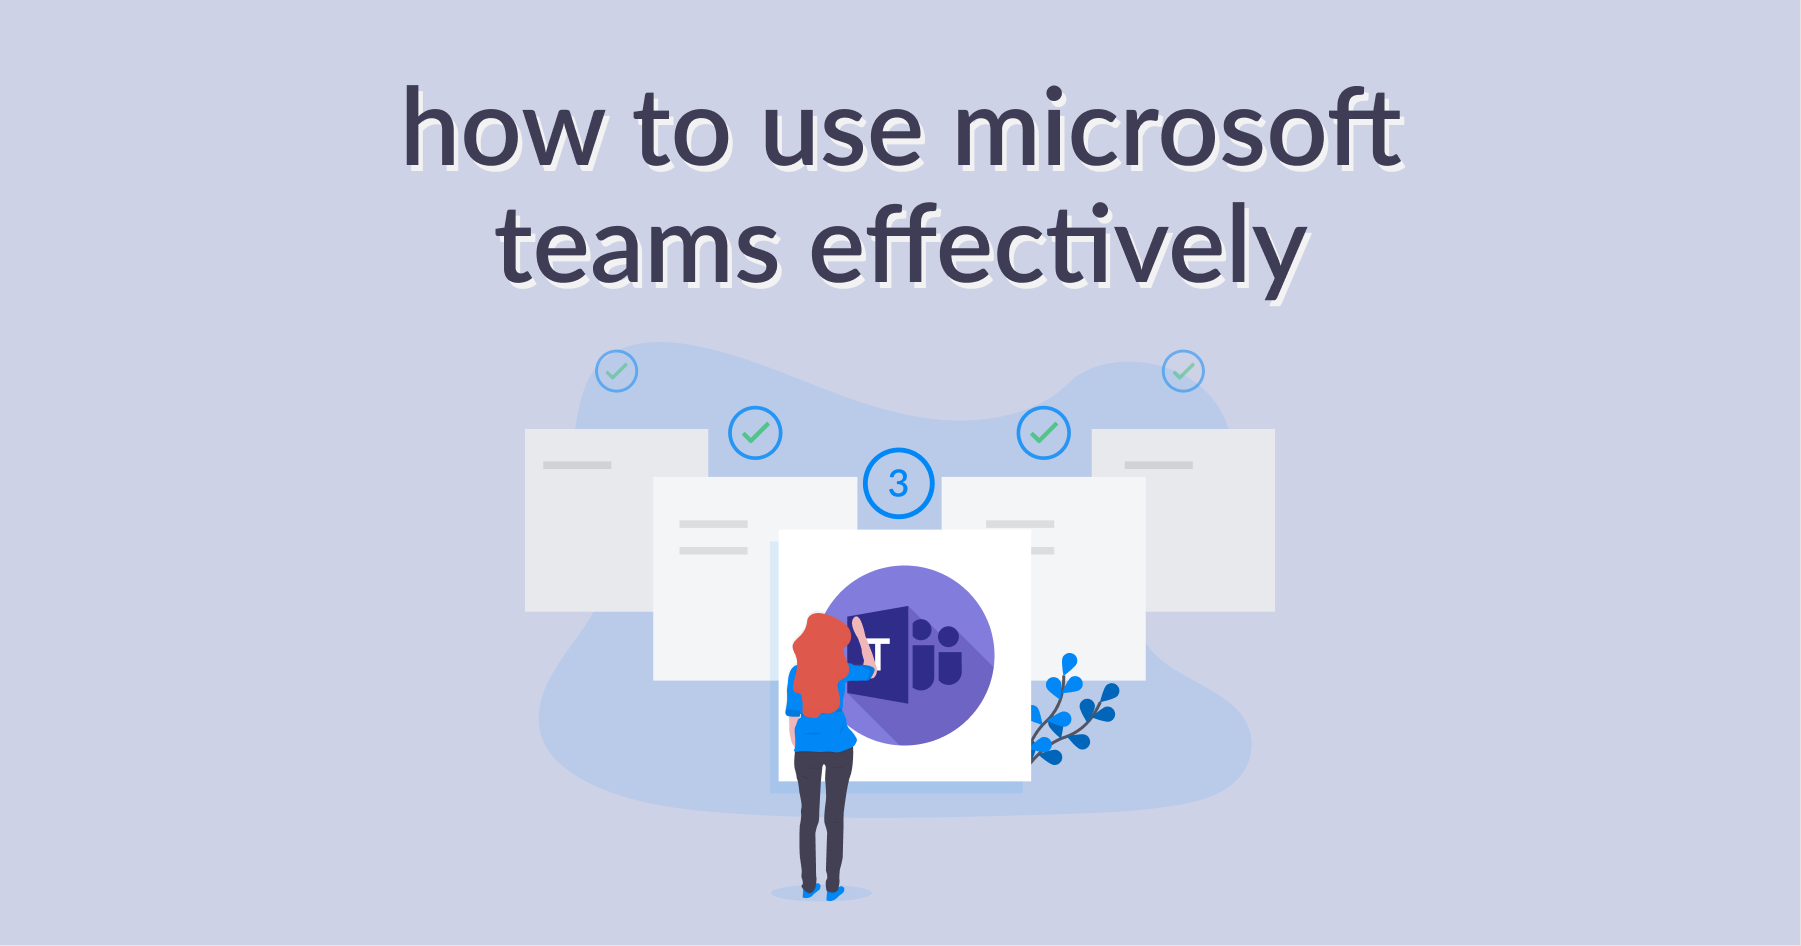 How to Use Microsoft Teams Effectively Guide 3: Messaging